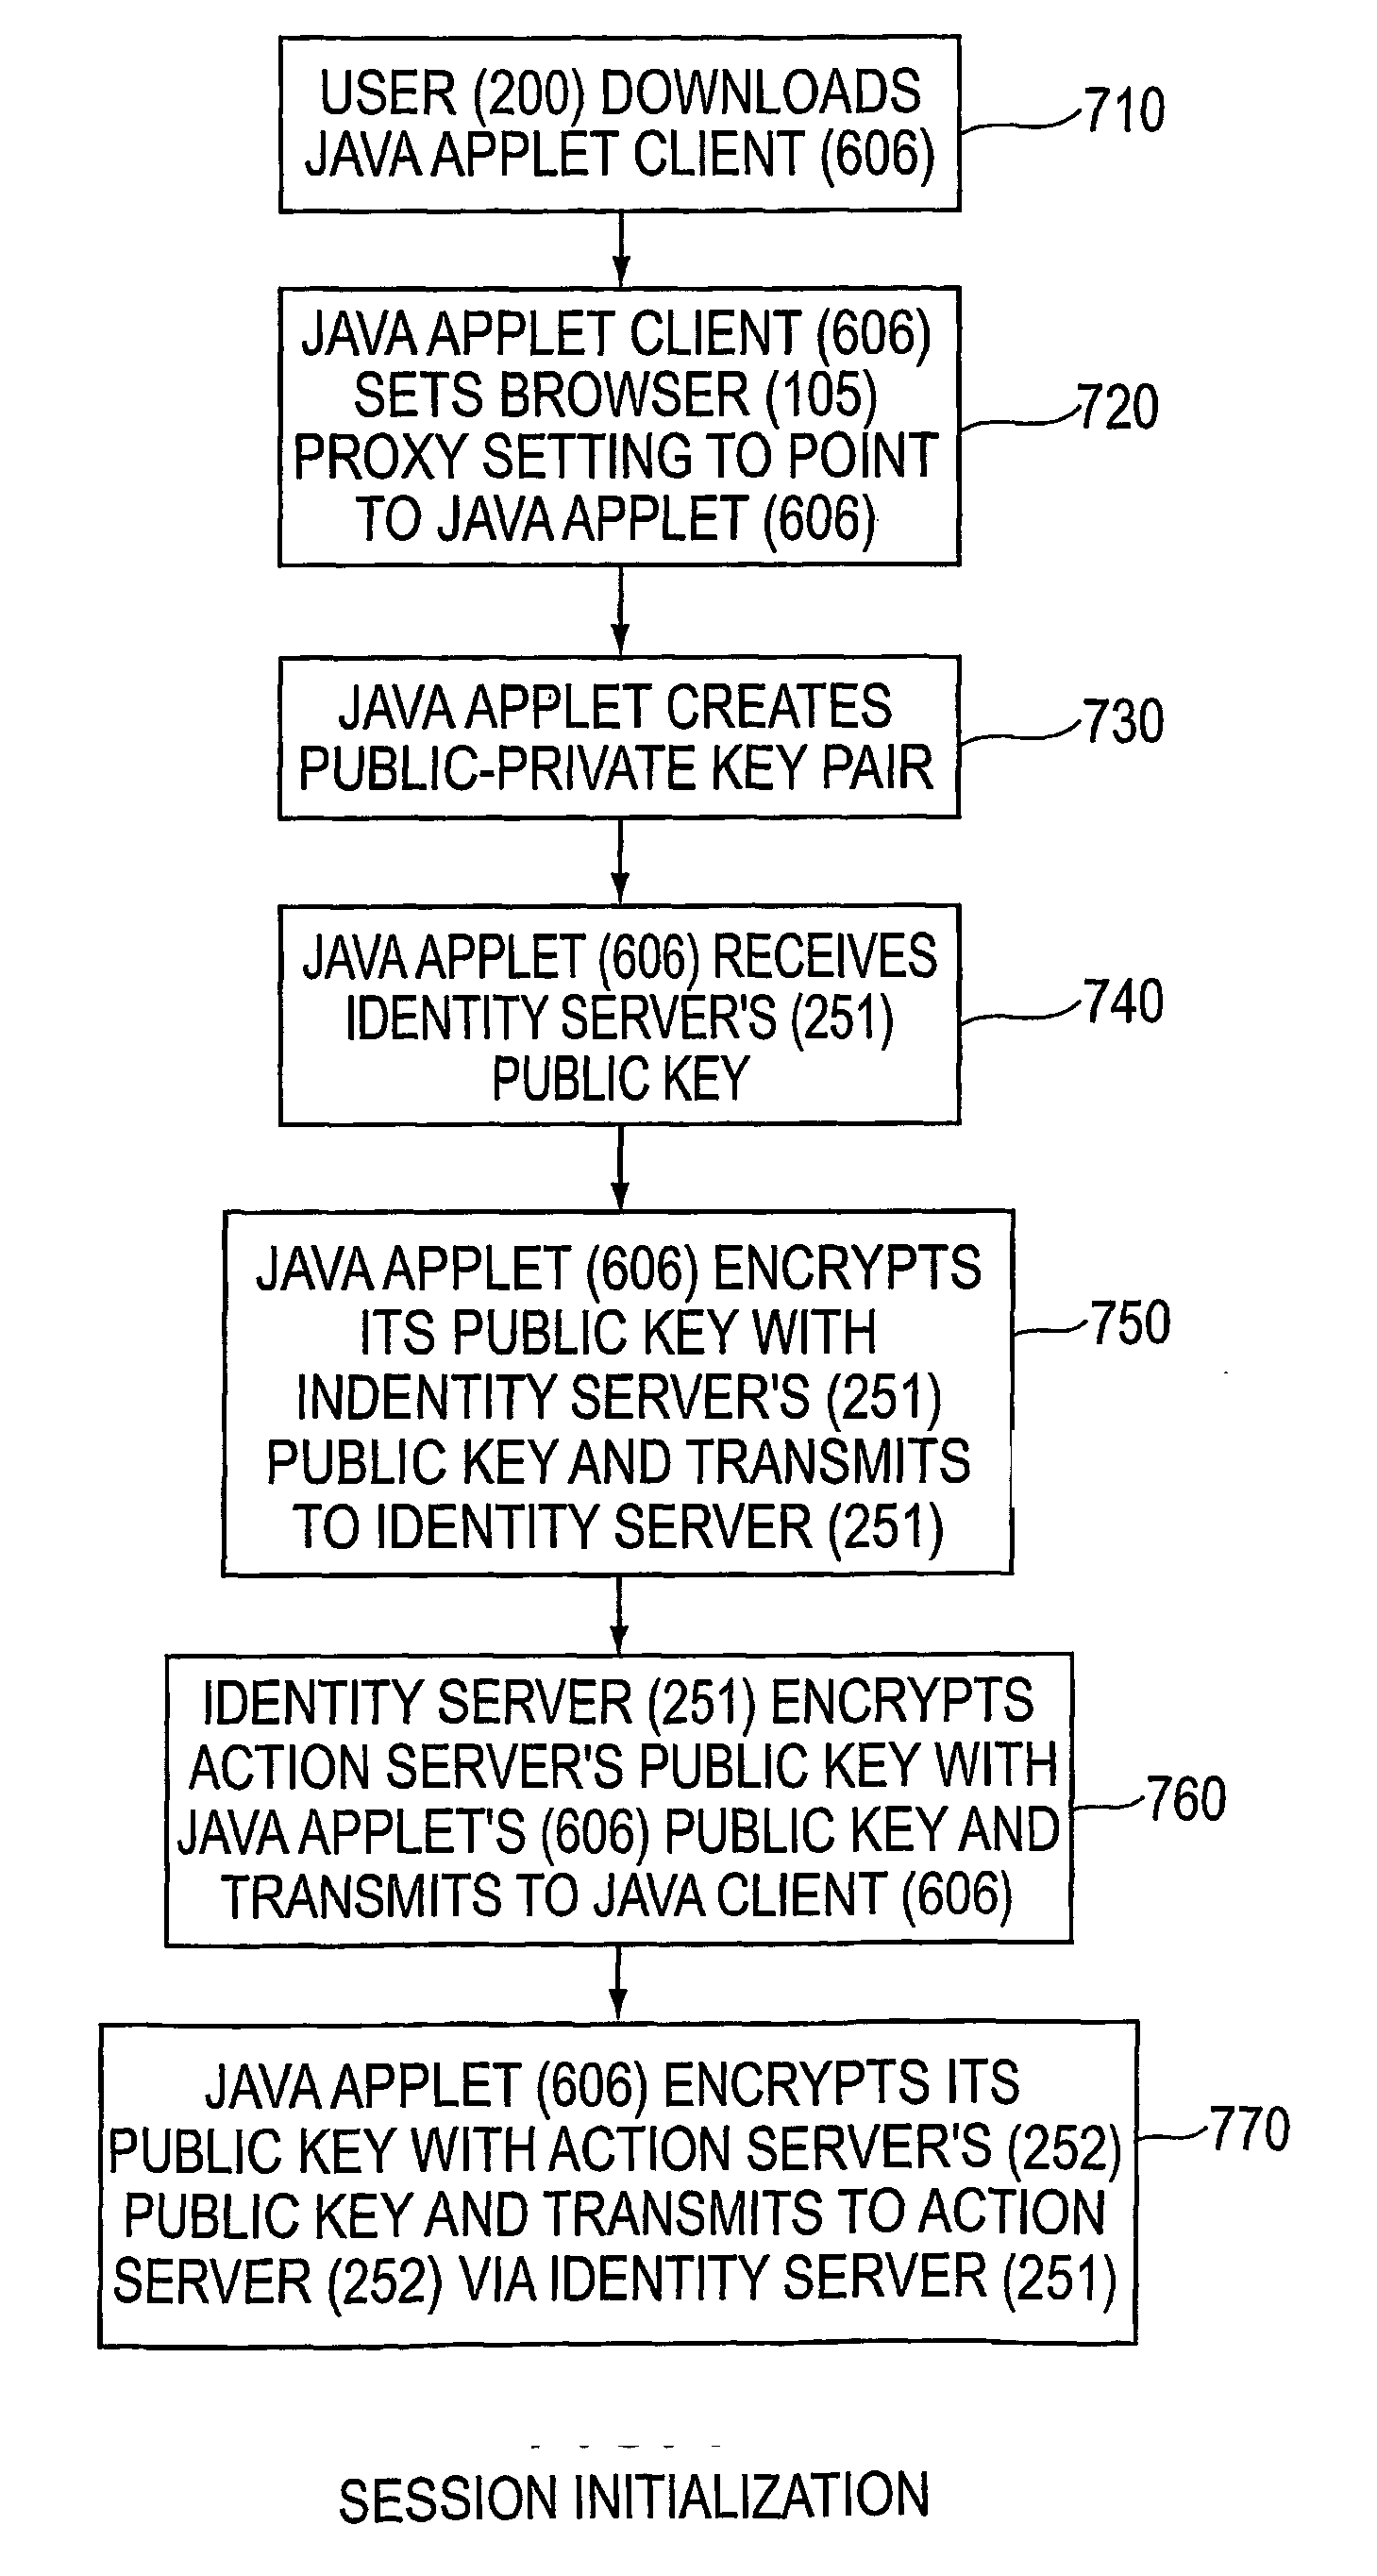 System for providing session-based network privacy, private, persistent storage, and discretionary access control for sharing private data